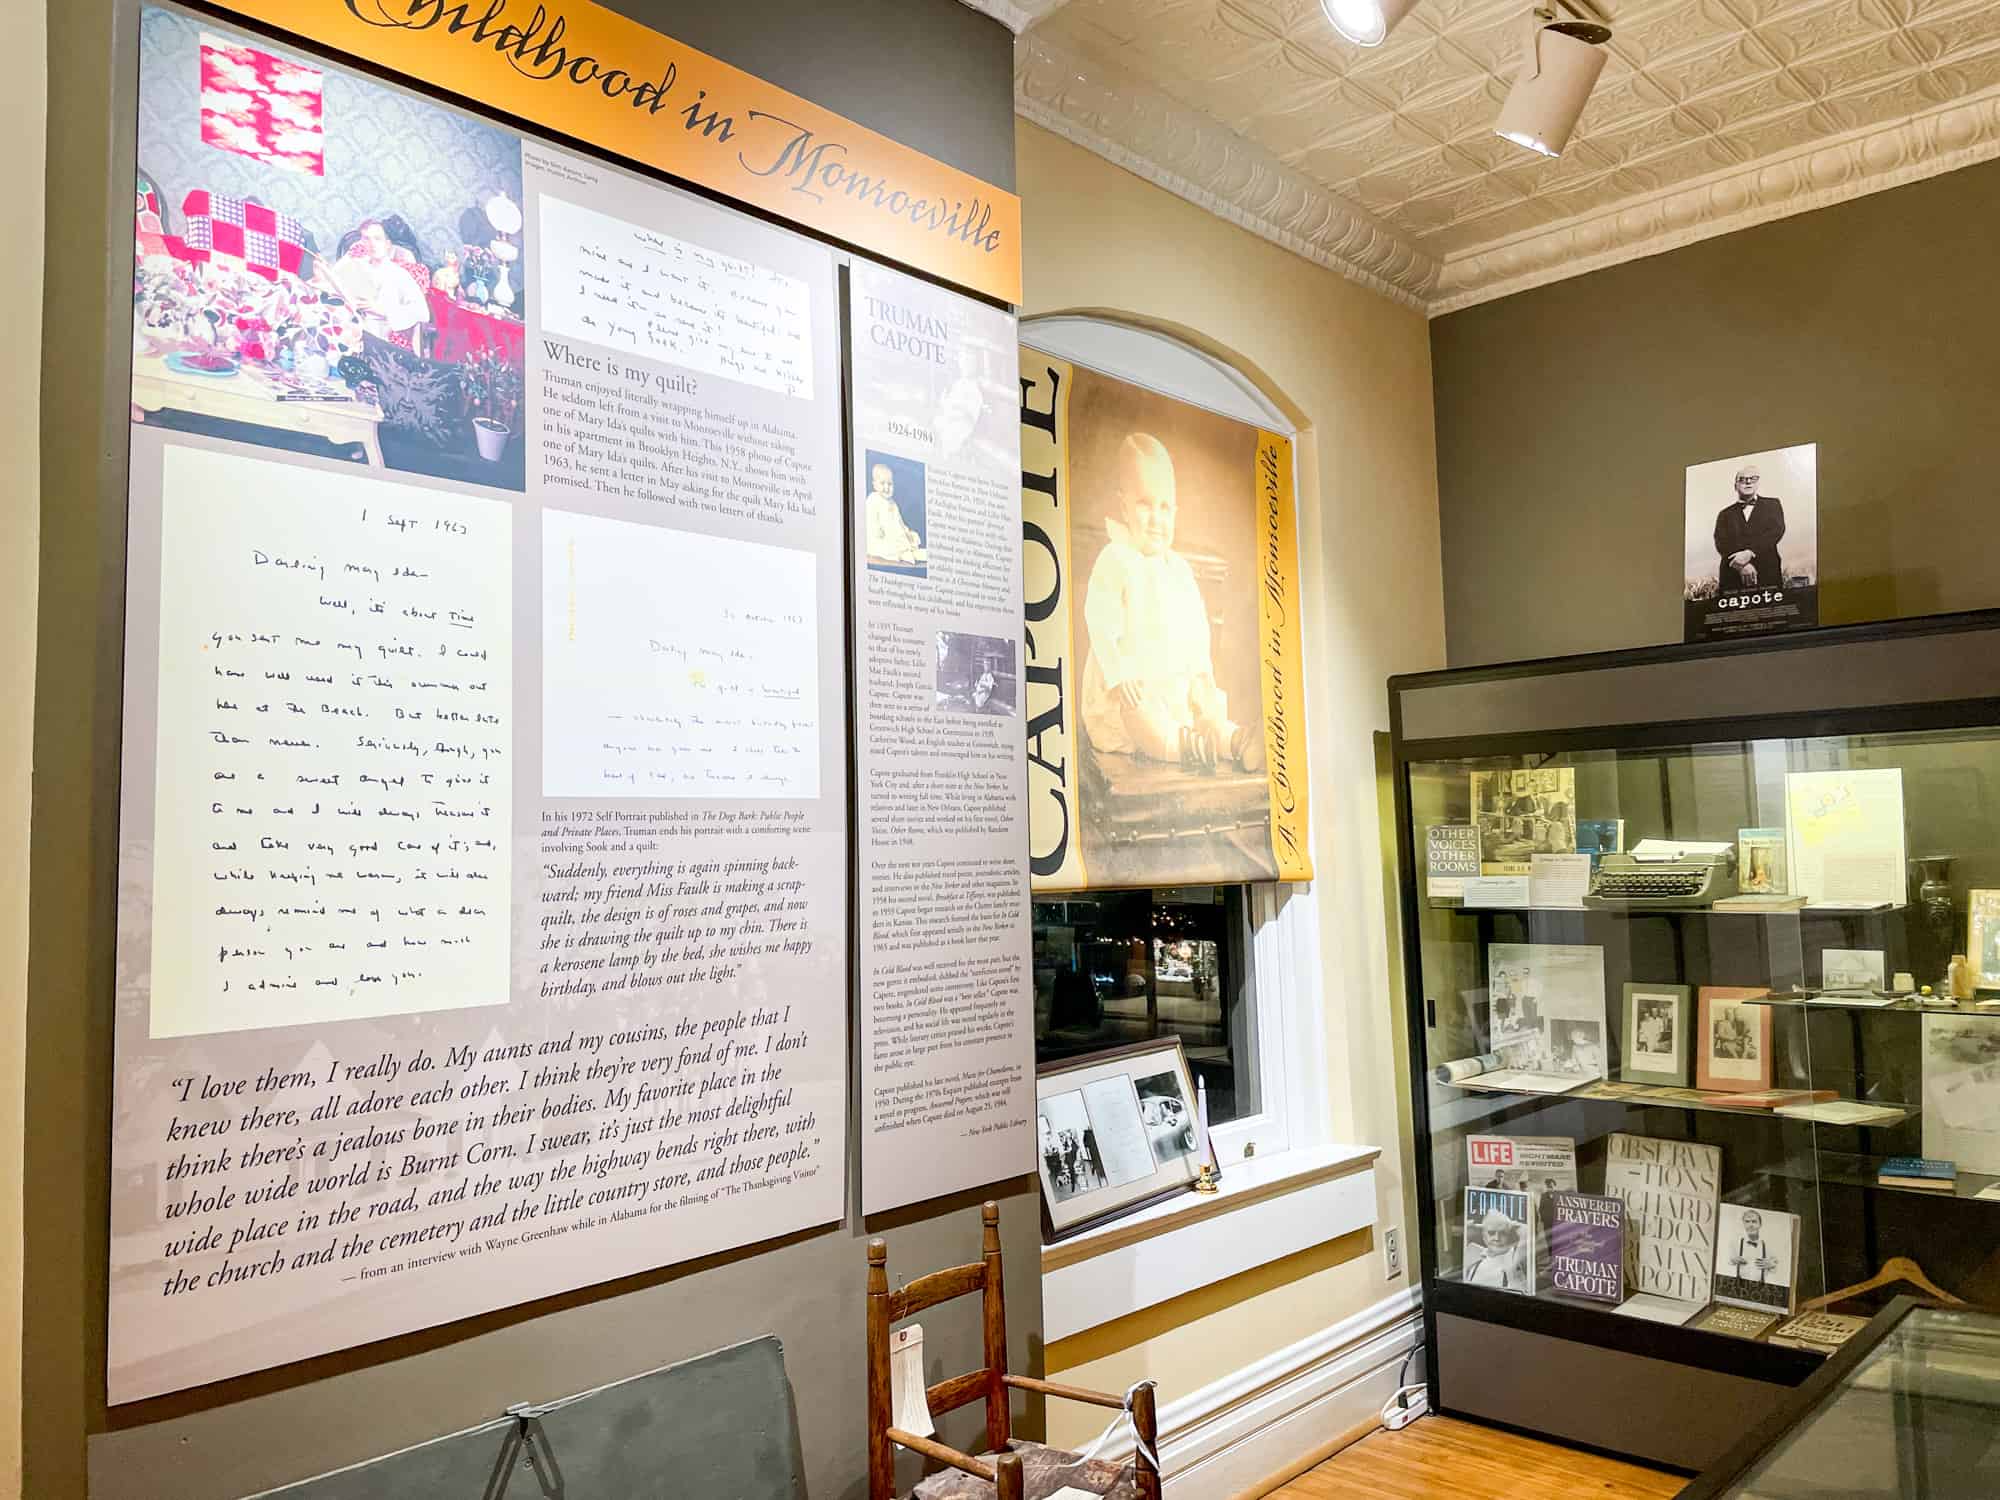 Facts about Alabama - Truman Capote museum